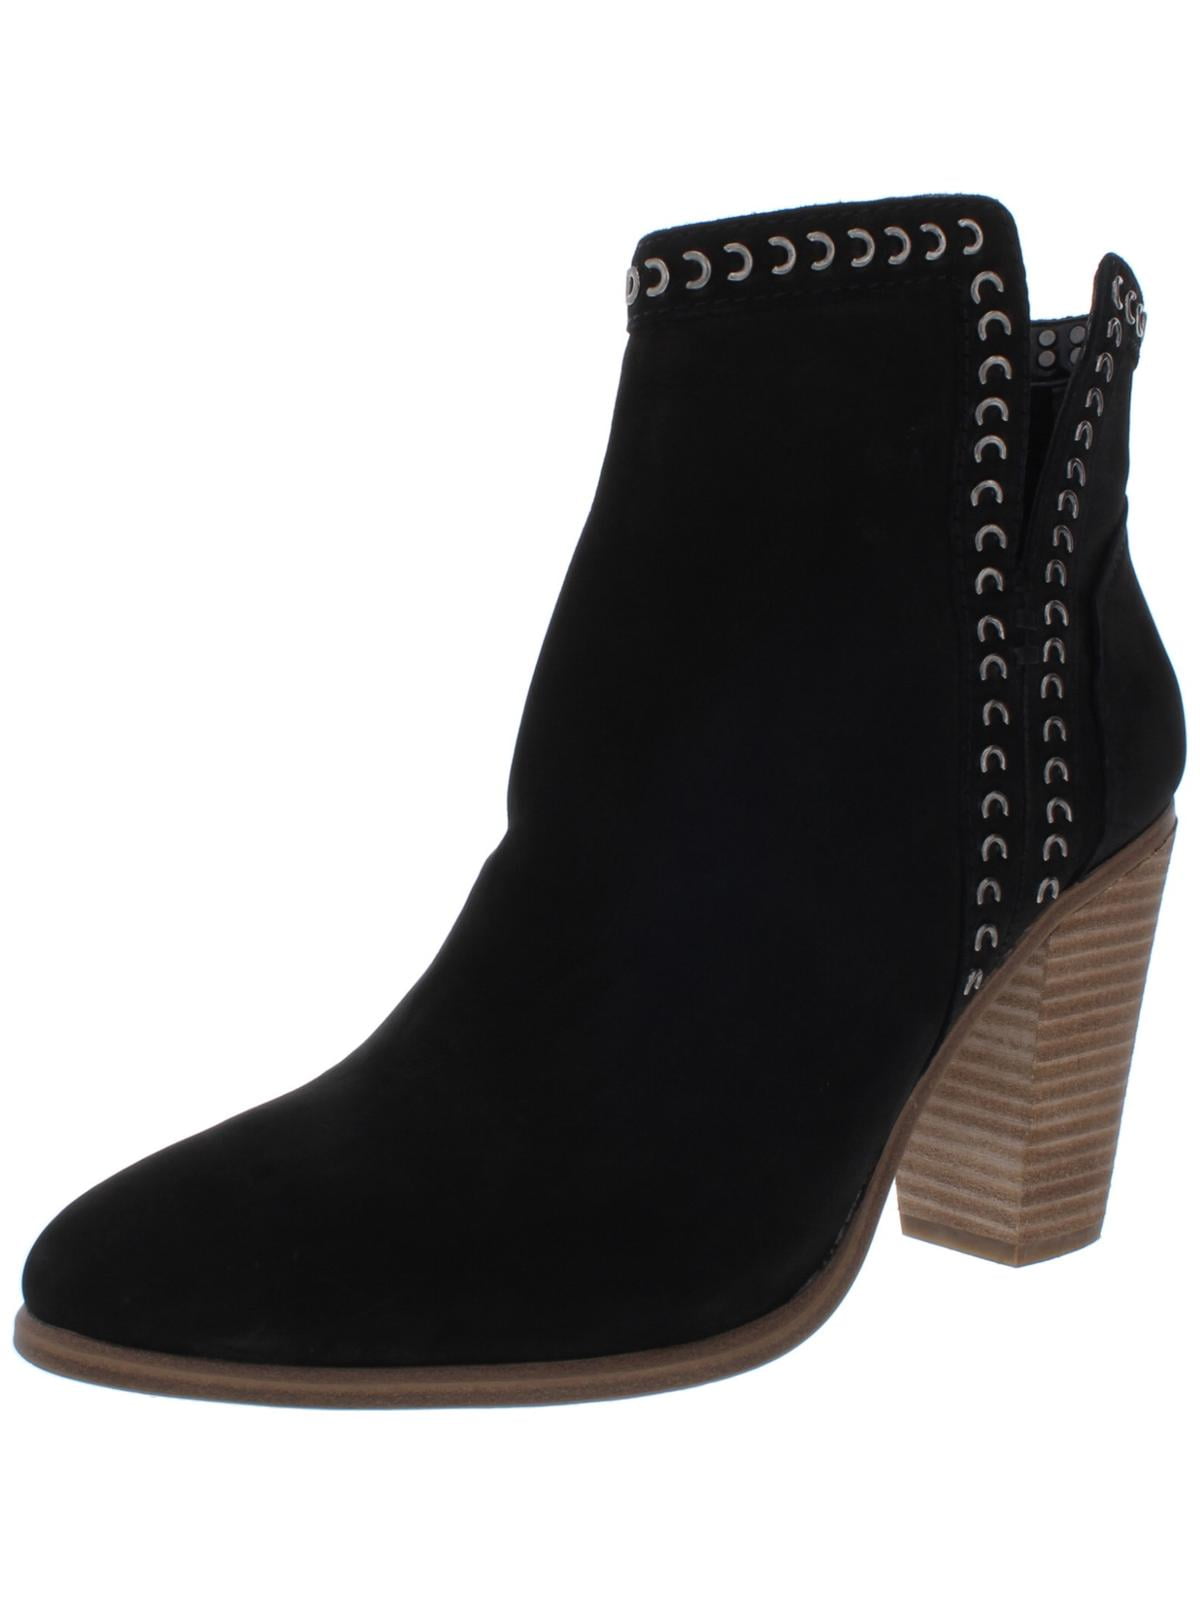 finchie bootie vince camuto